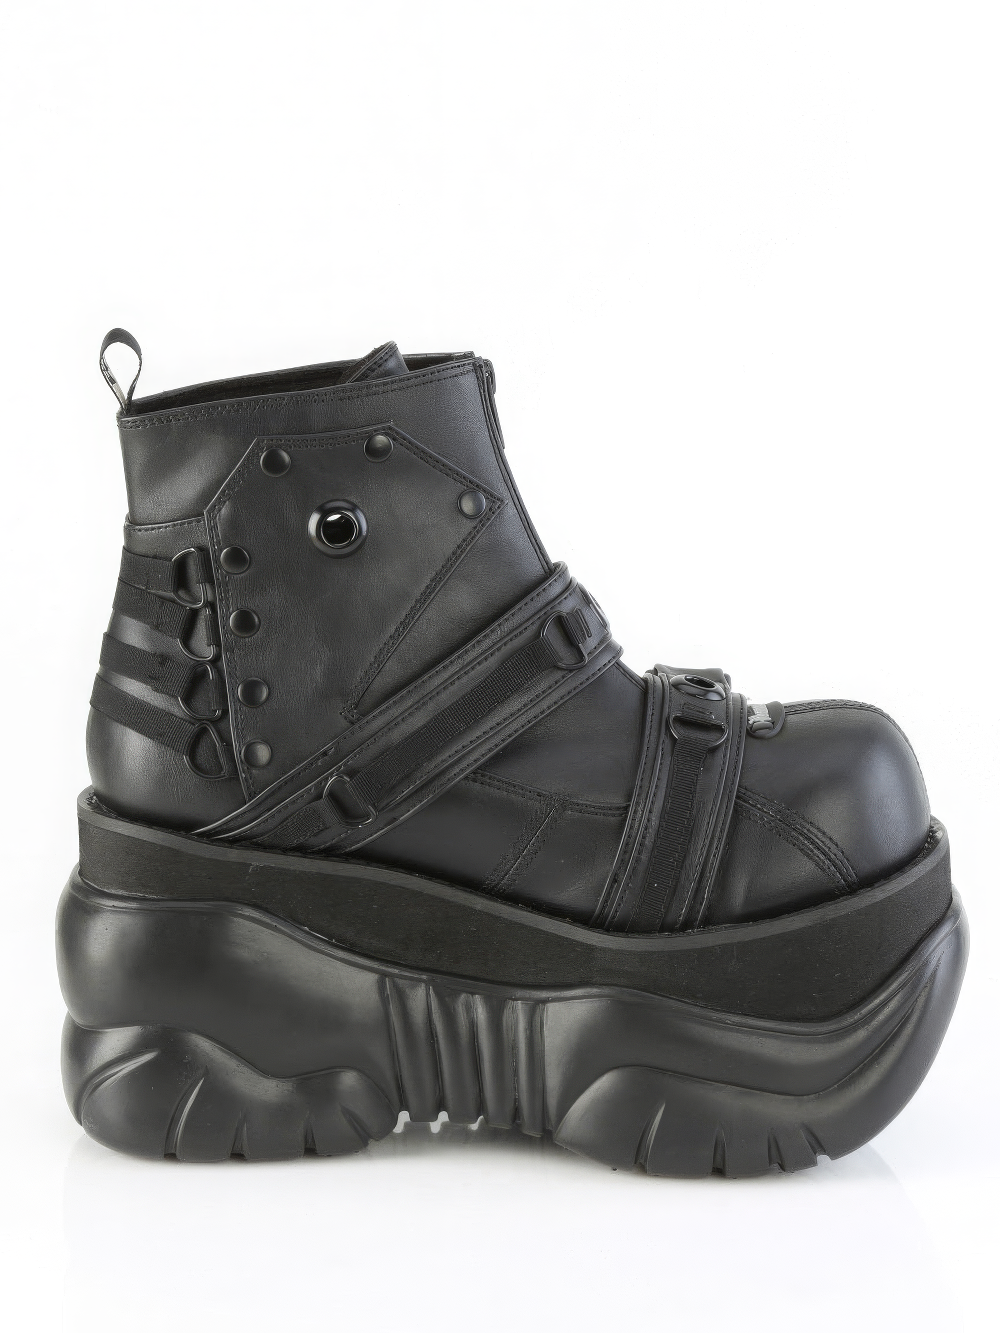 DEMONIA Strappy Cyberpunk Platform Ankle Boots with Buckles